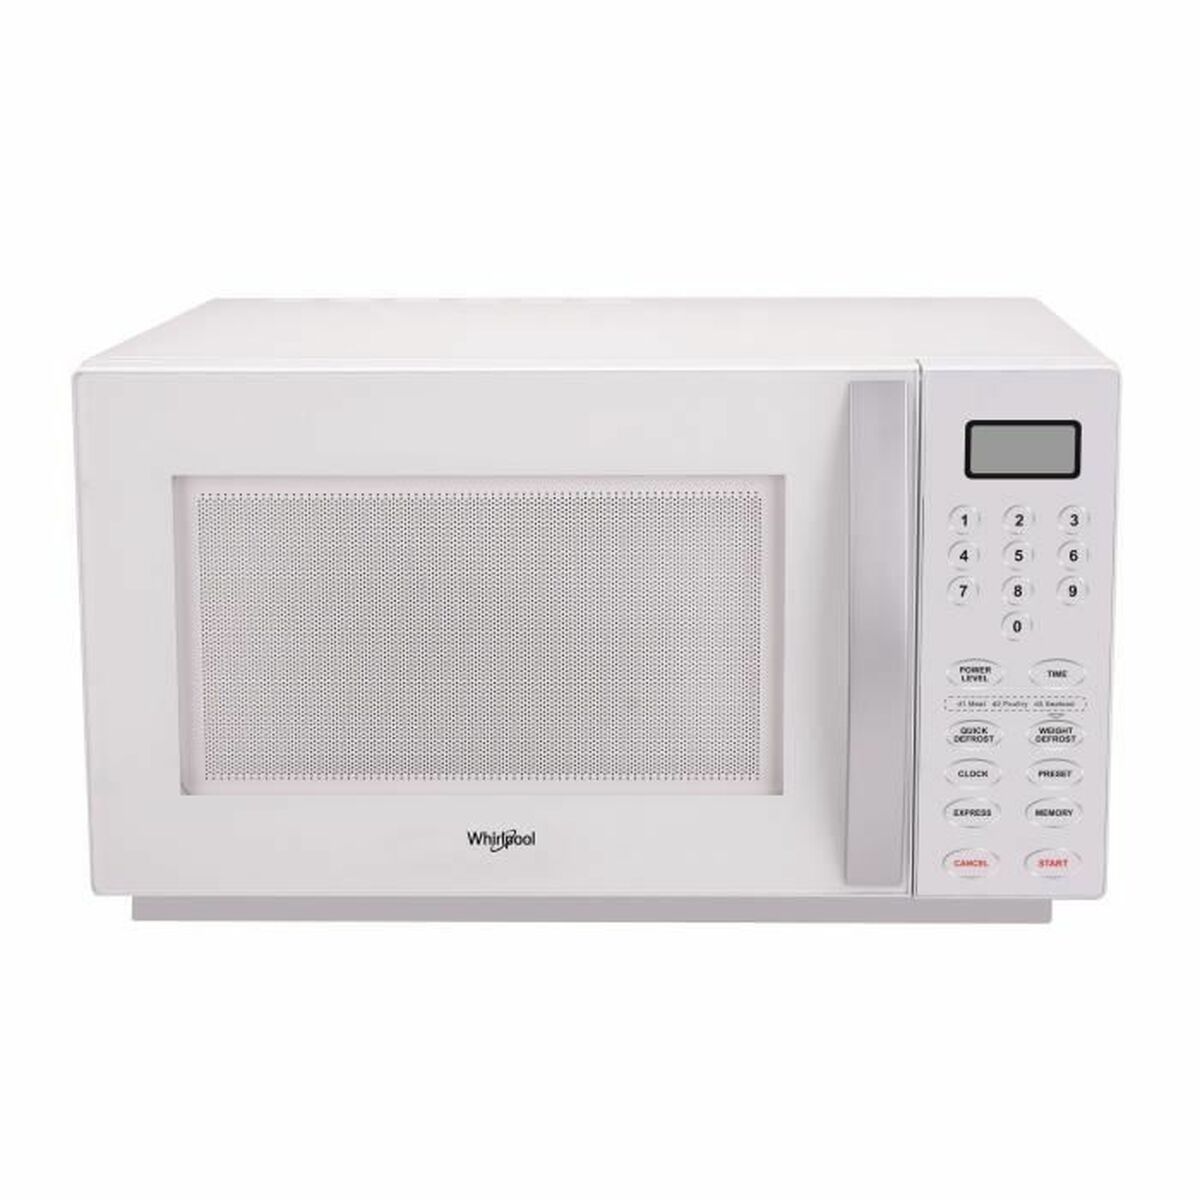 Microwave Oven Whirlpool Corporation 850 W White 30 L